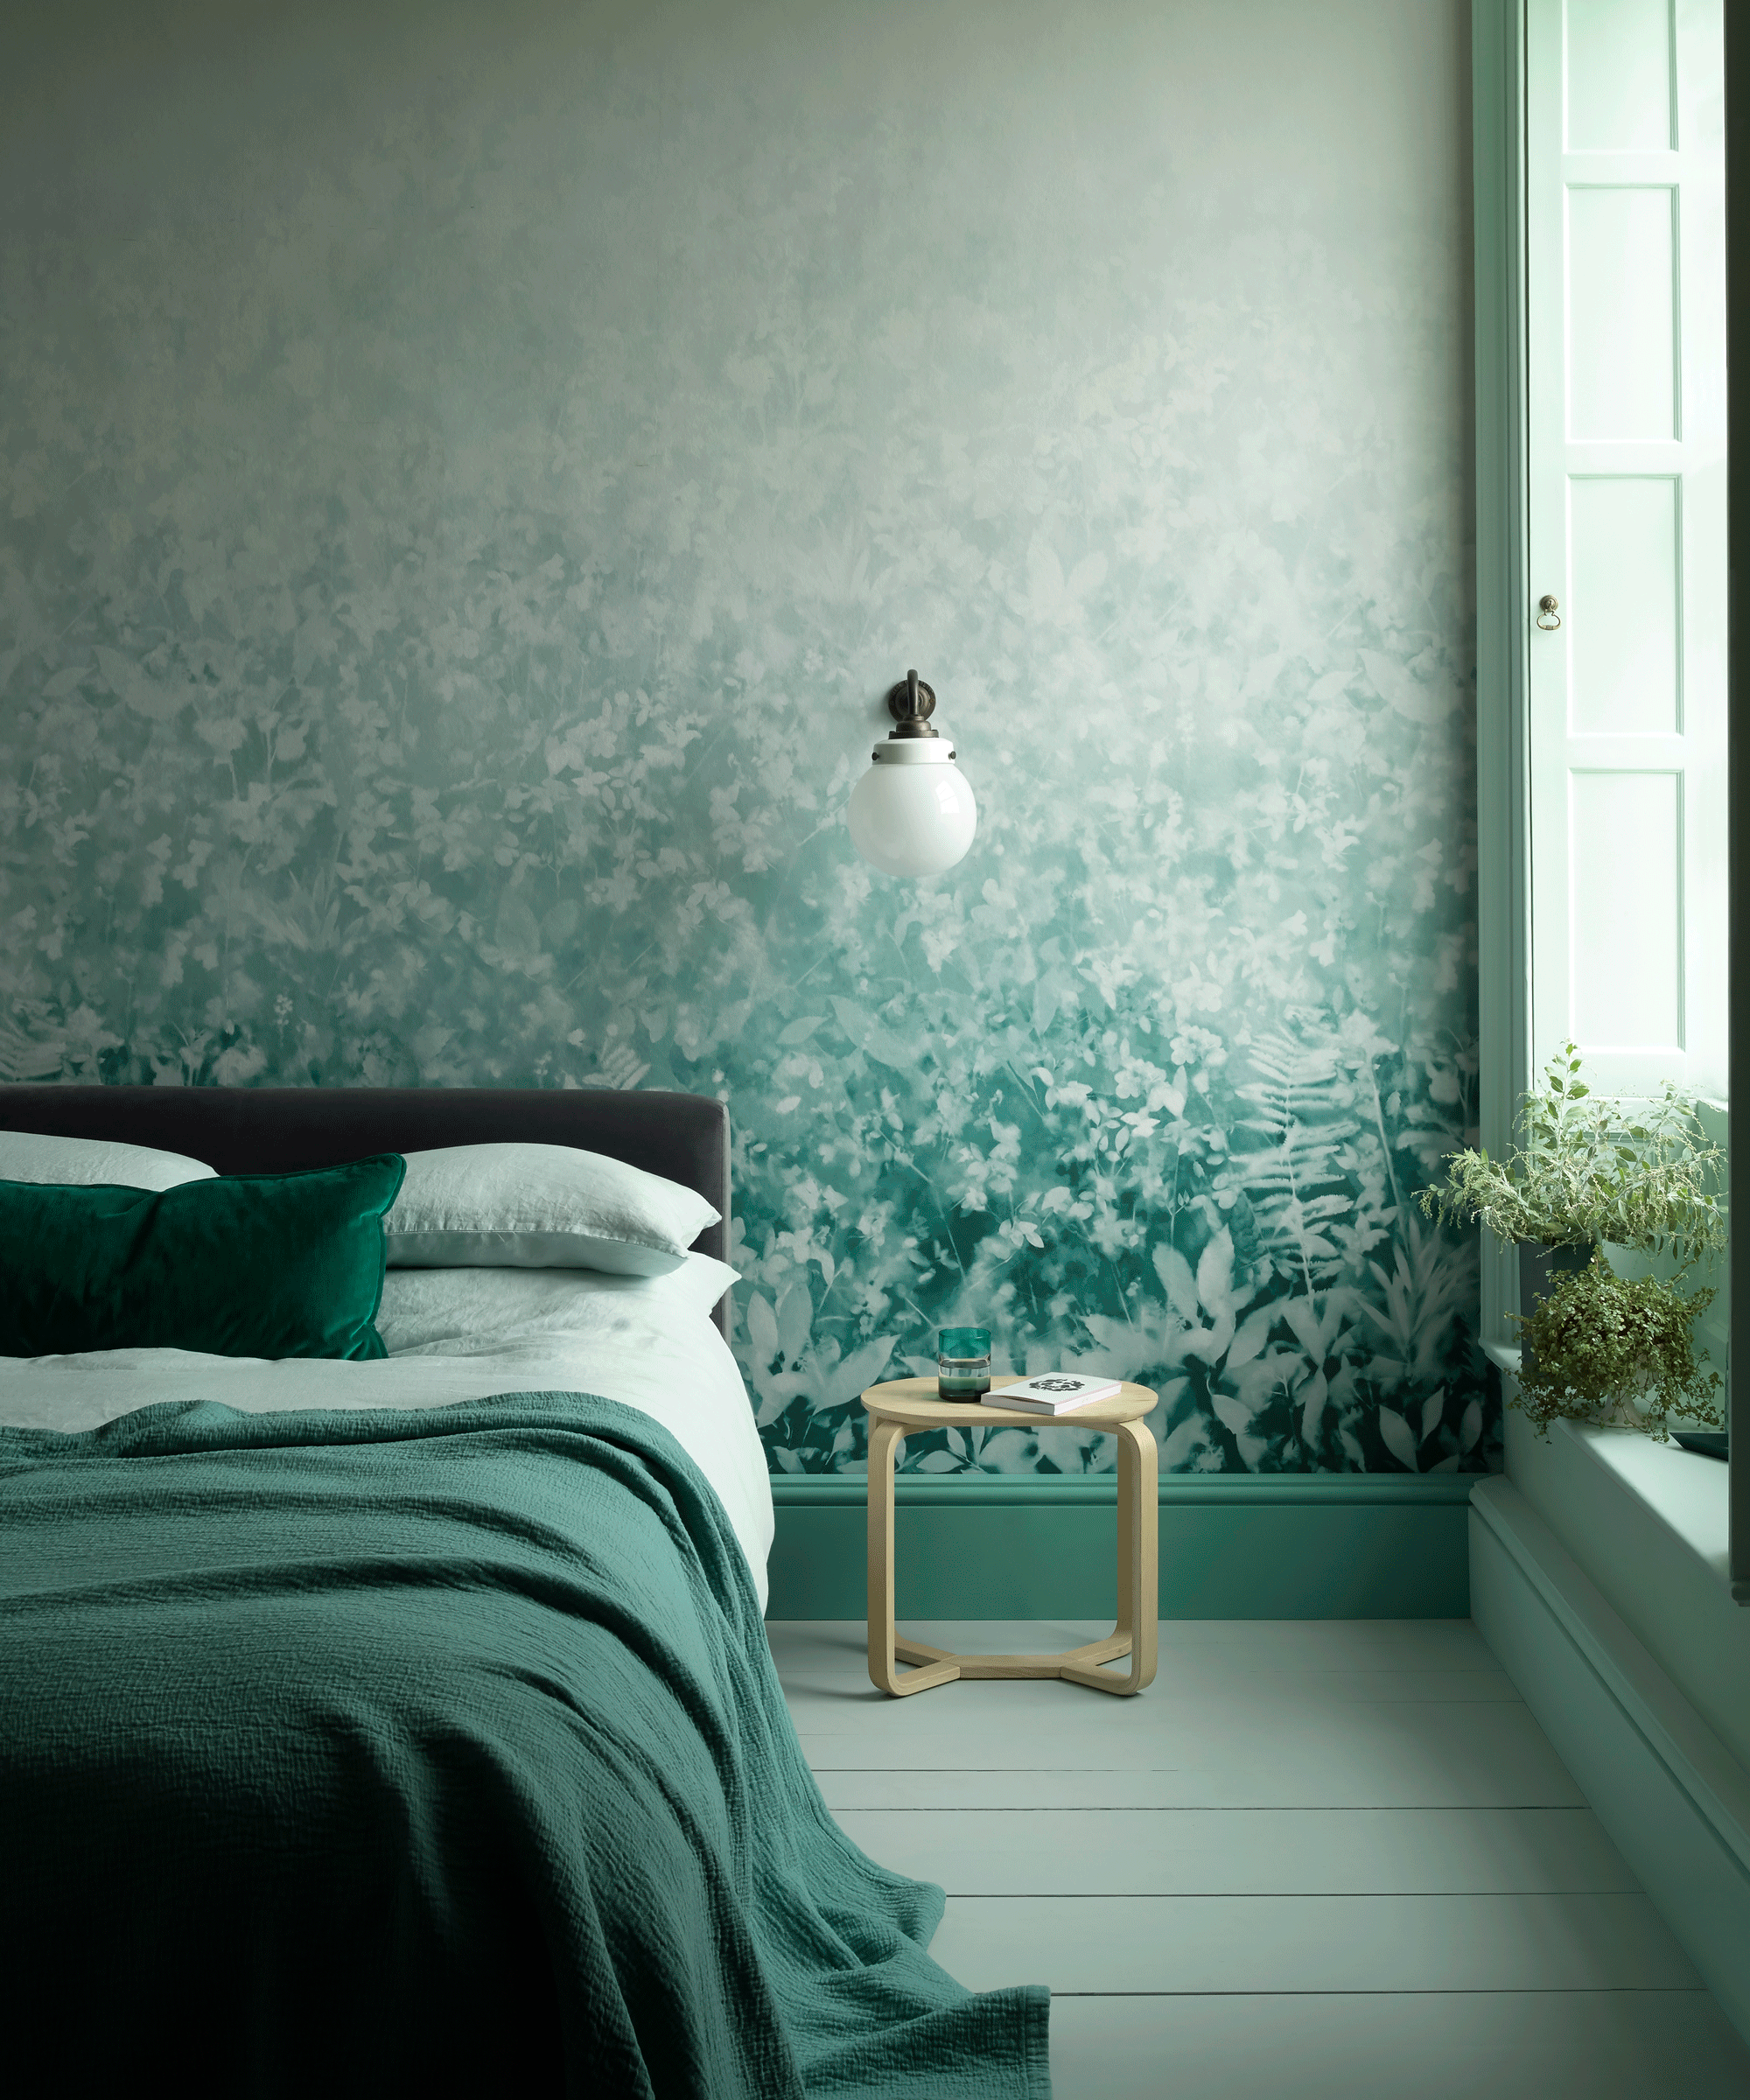 Bedroom with teal patterned wallpaper